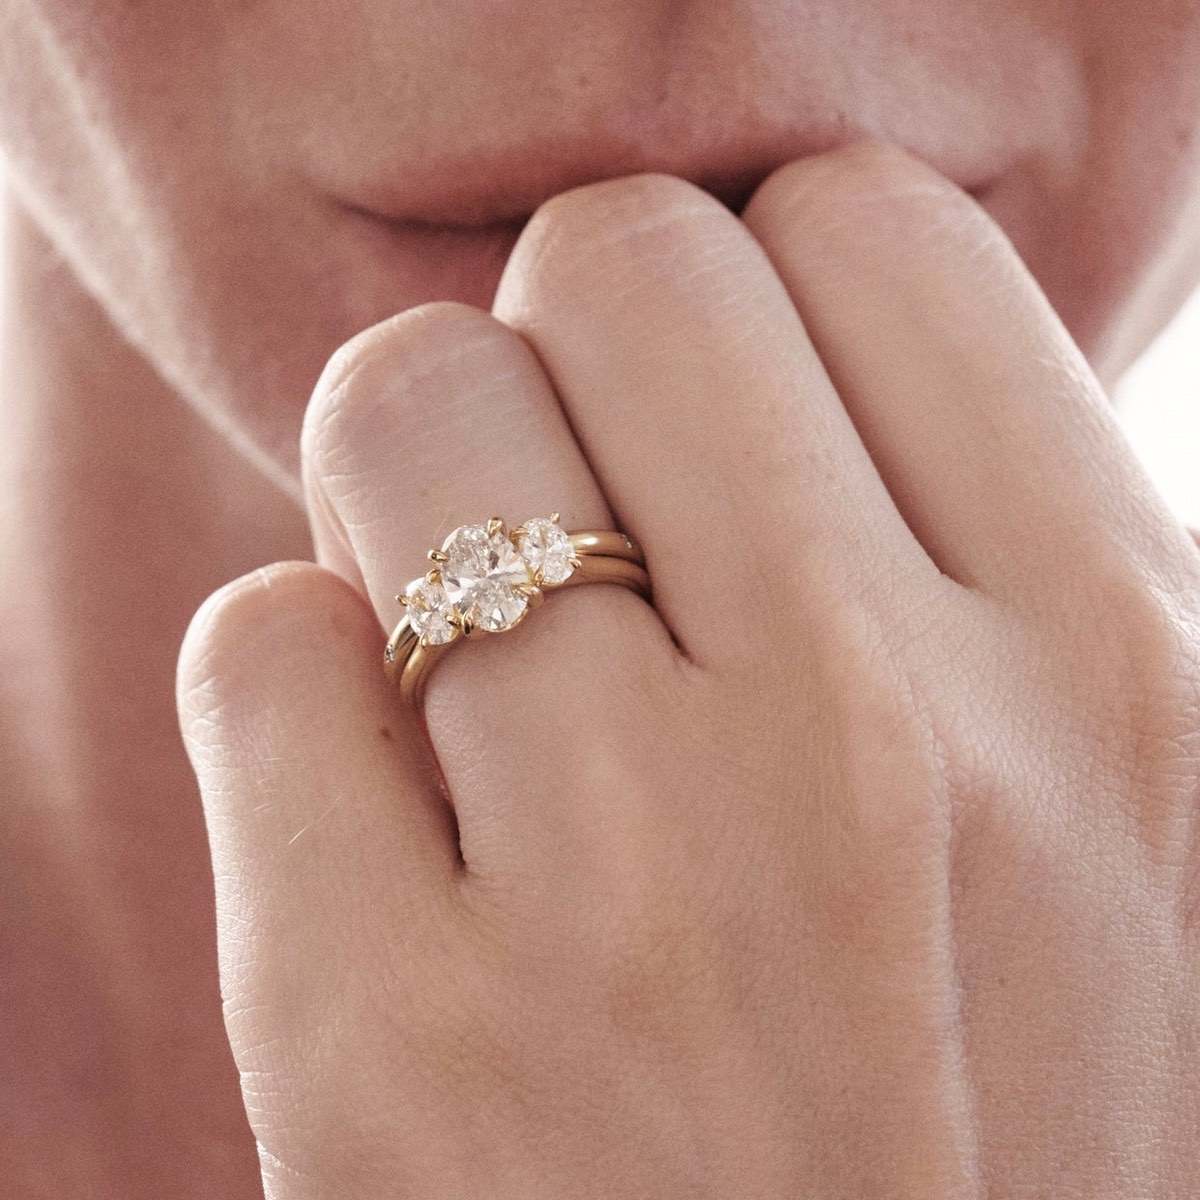 Our Ava ring showcases a brilliant oval cut centre stone shining between two smaller-sized shoulder stones. The centre stone size pictured is 1ct and the shoulder stones are 0.25ct each.